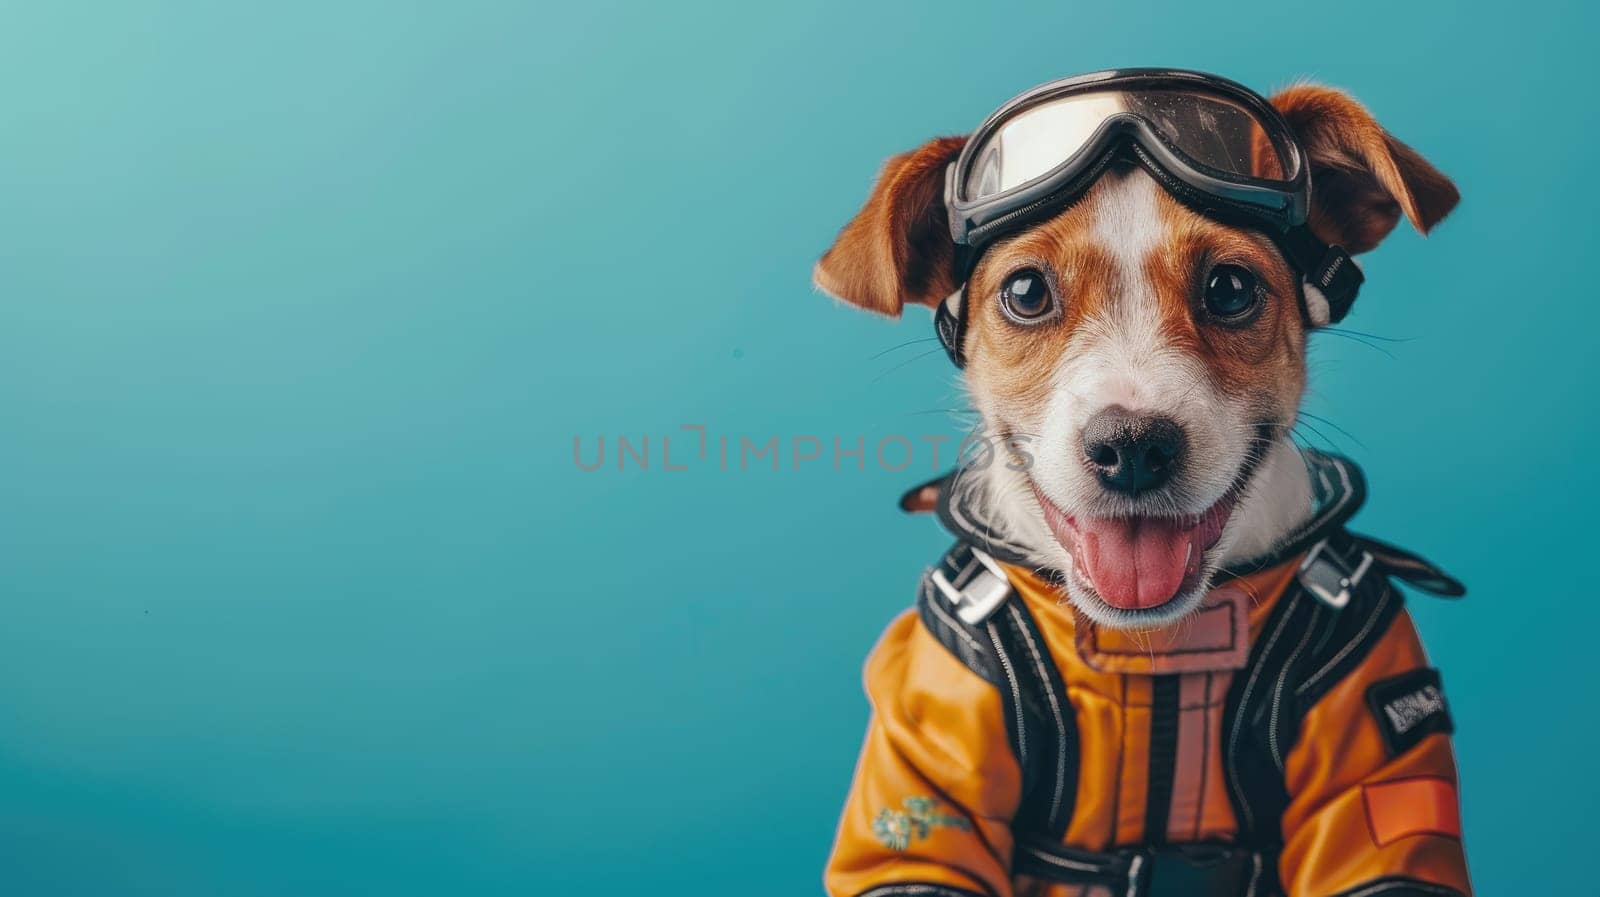 A smiling cute dog wearing a motor racer suit and sitting on the blue color background.